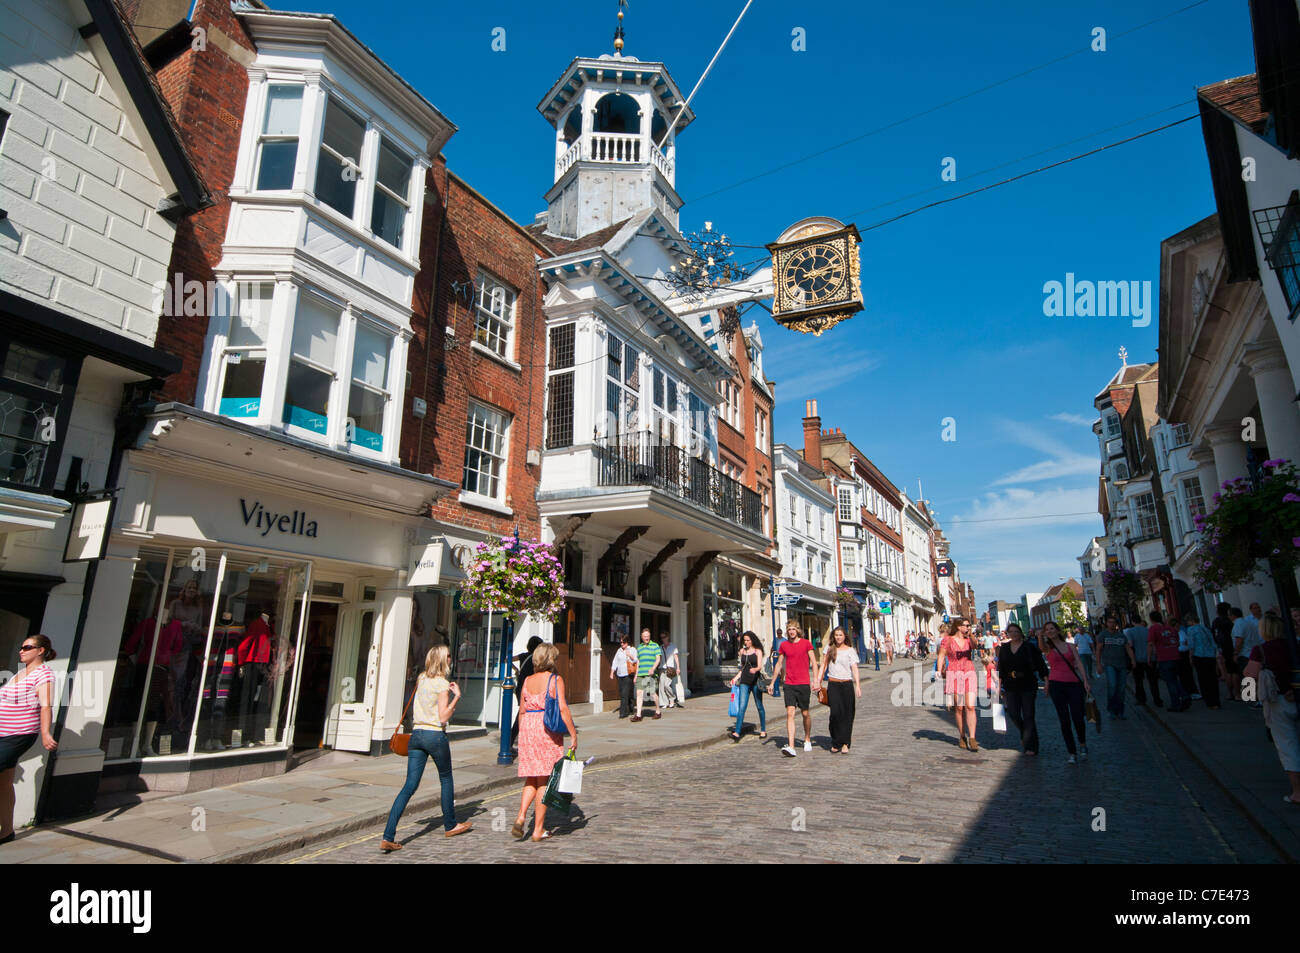 The Guildhall Building and Town Clock High Street Guildford Surrey England UK Stock Photo